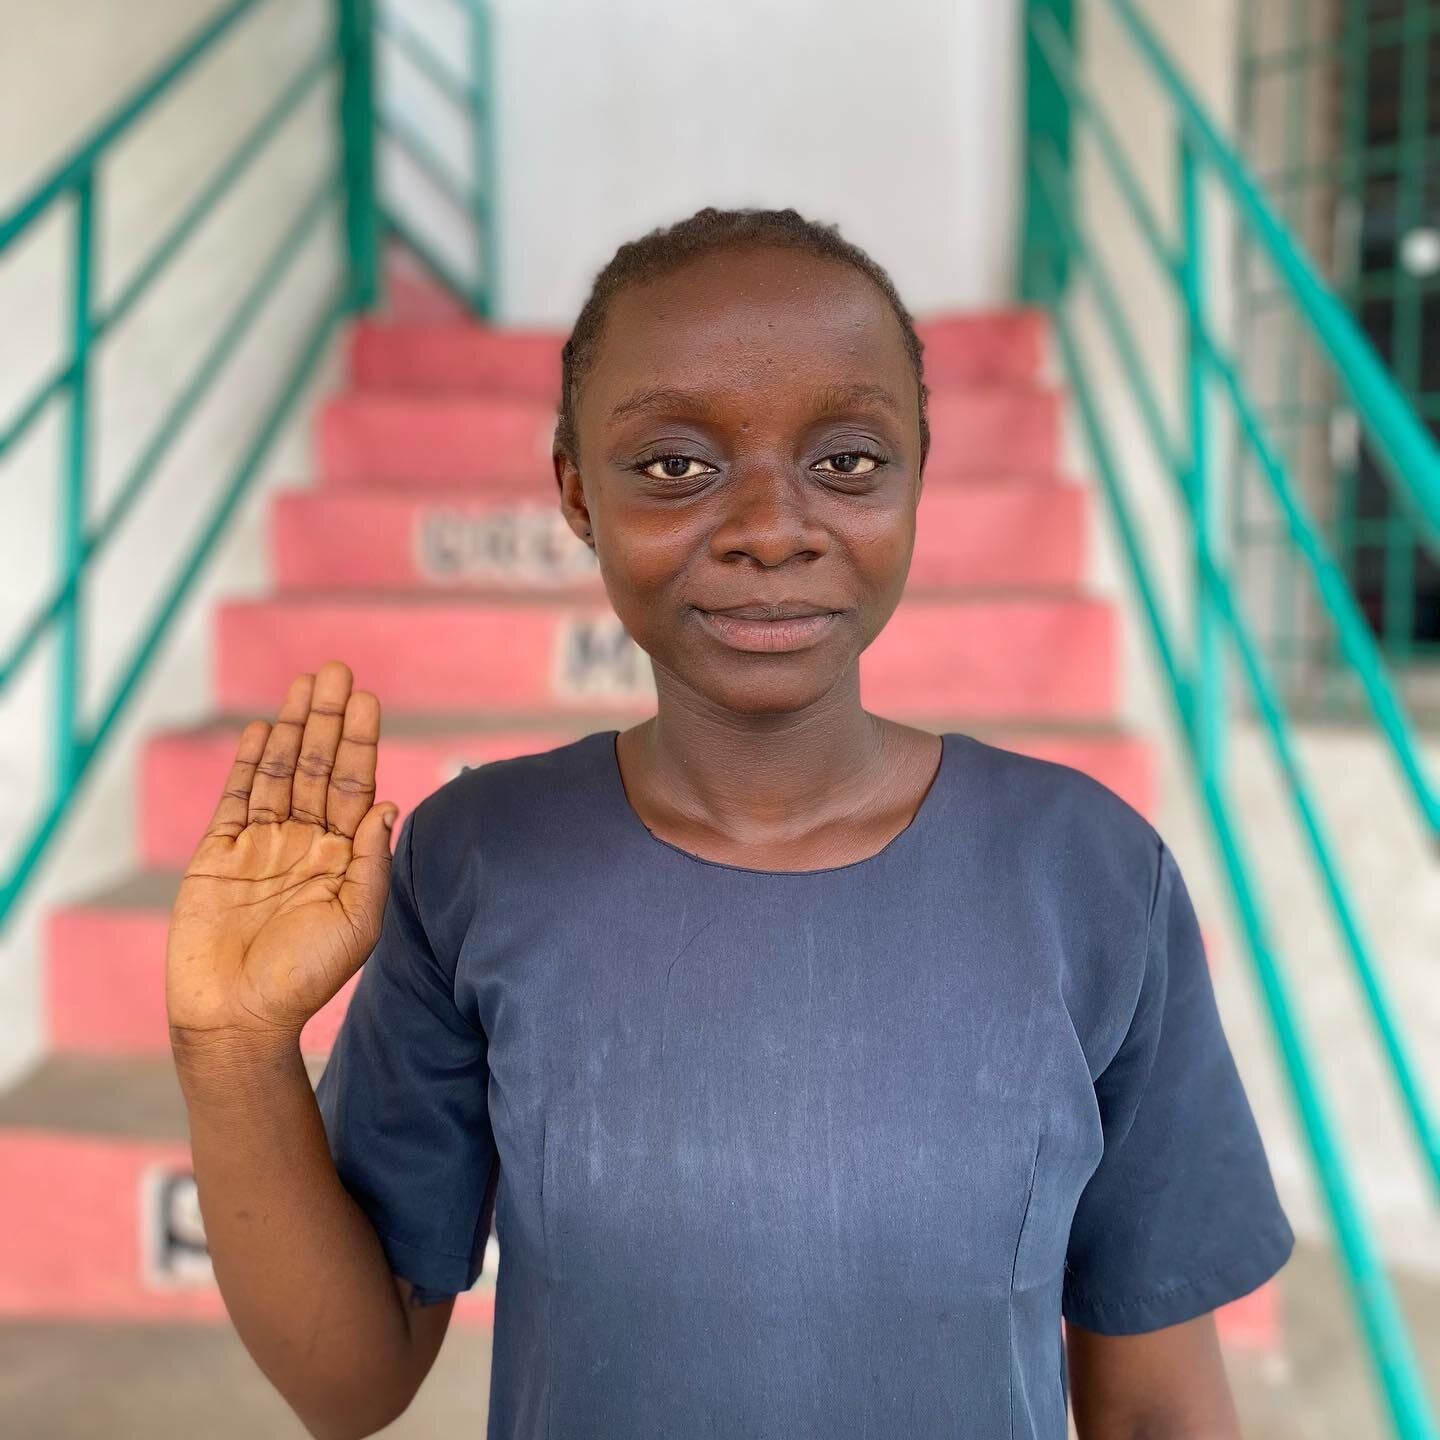 &ldquo;I choose to challenge gender inequality.&rdquo; Esther, Grade 7 

Happy International Women&rsquo;s day! Join us to support a girl&rsquo;s education today in honor of a special woman in your life.

#choosetochallenge #iwd2021 #girls #girlseduc